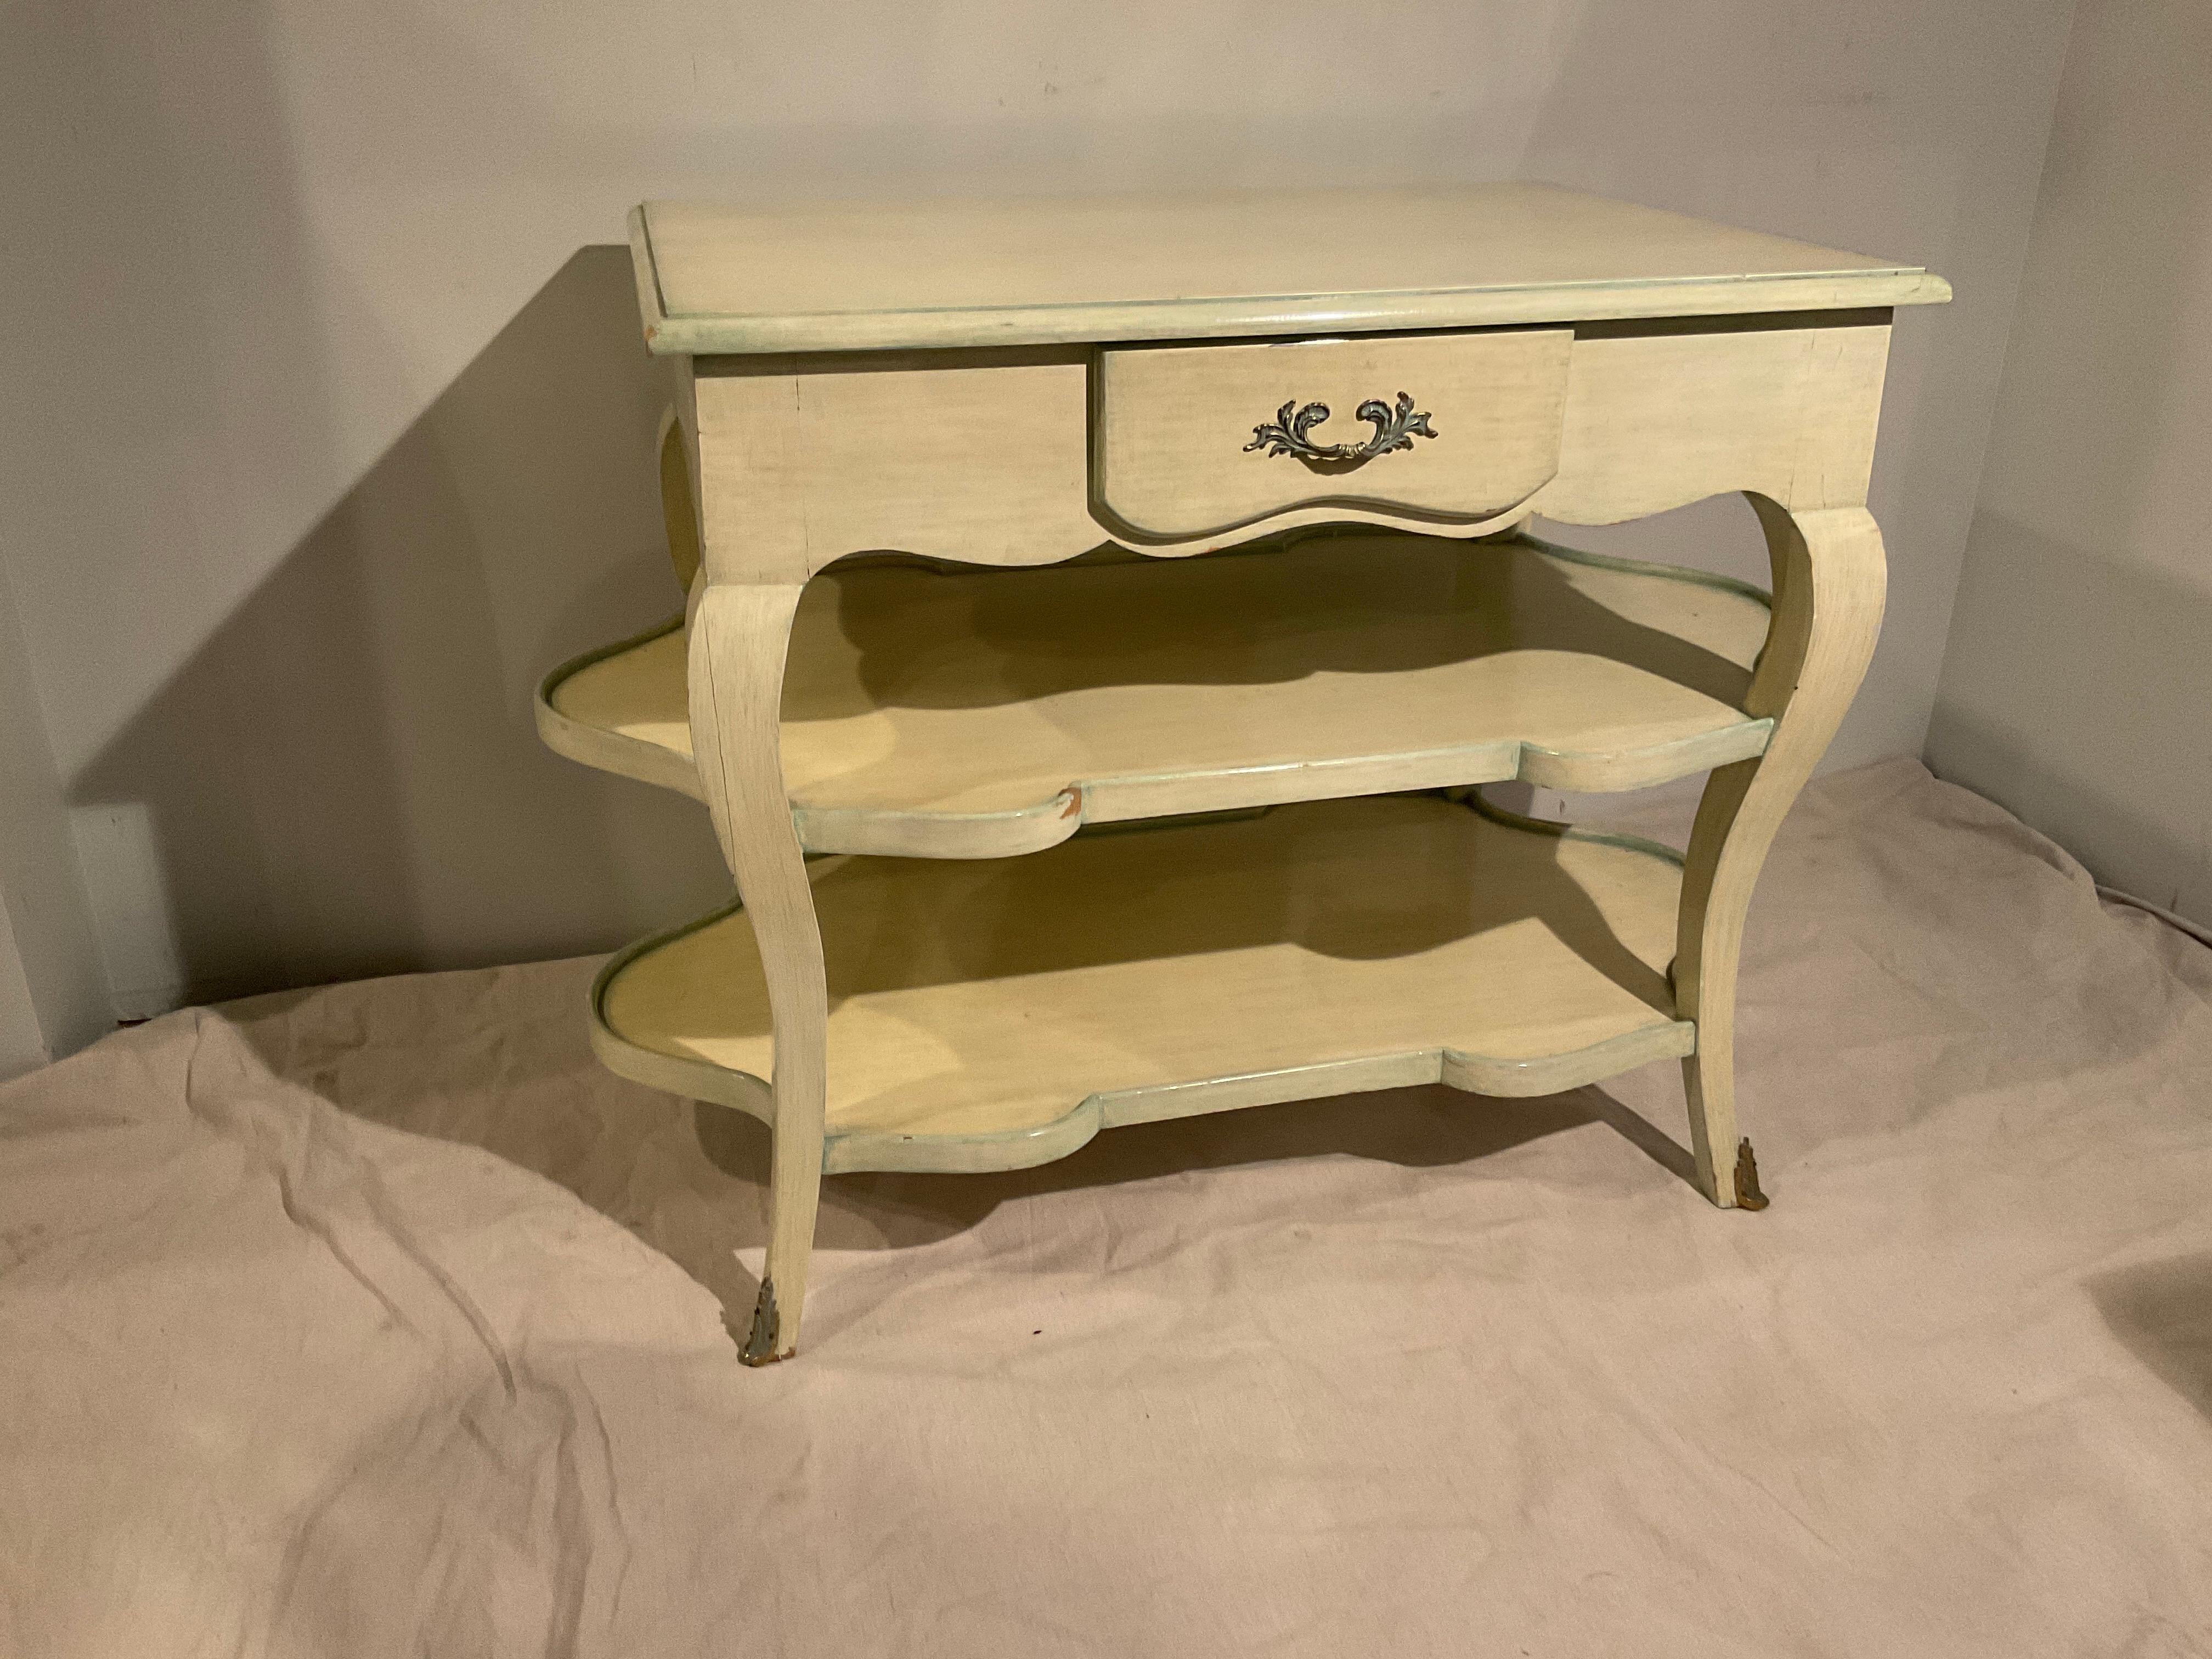 A pair of 1950s three tier end tables . Great for a living room or bedroom. Well made, solid tables . Each table has a shelf that slides out from the side. One table has a splatter of paint on it as shown in image 12.